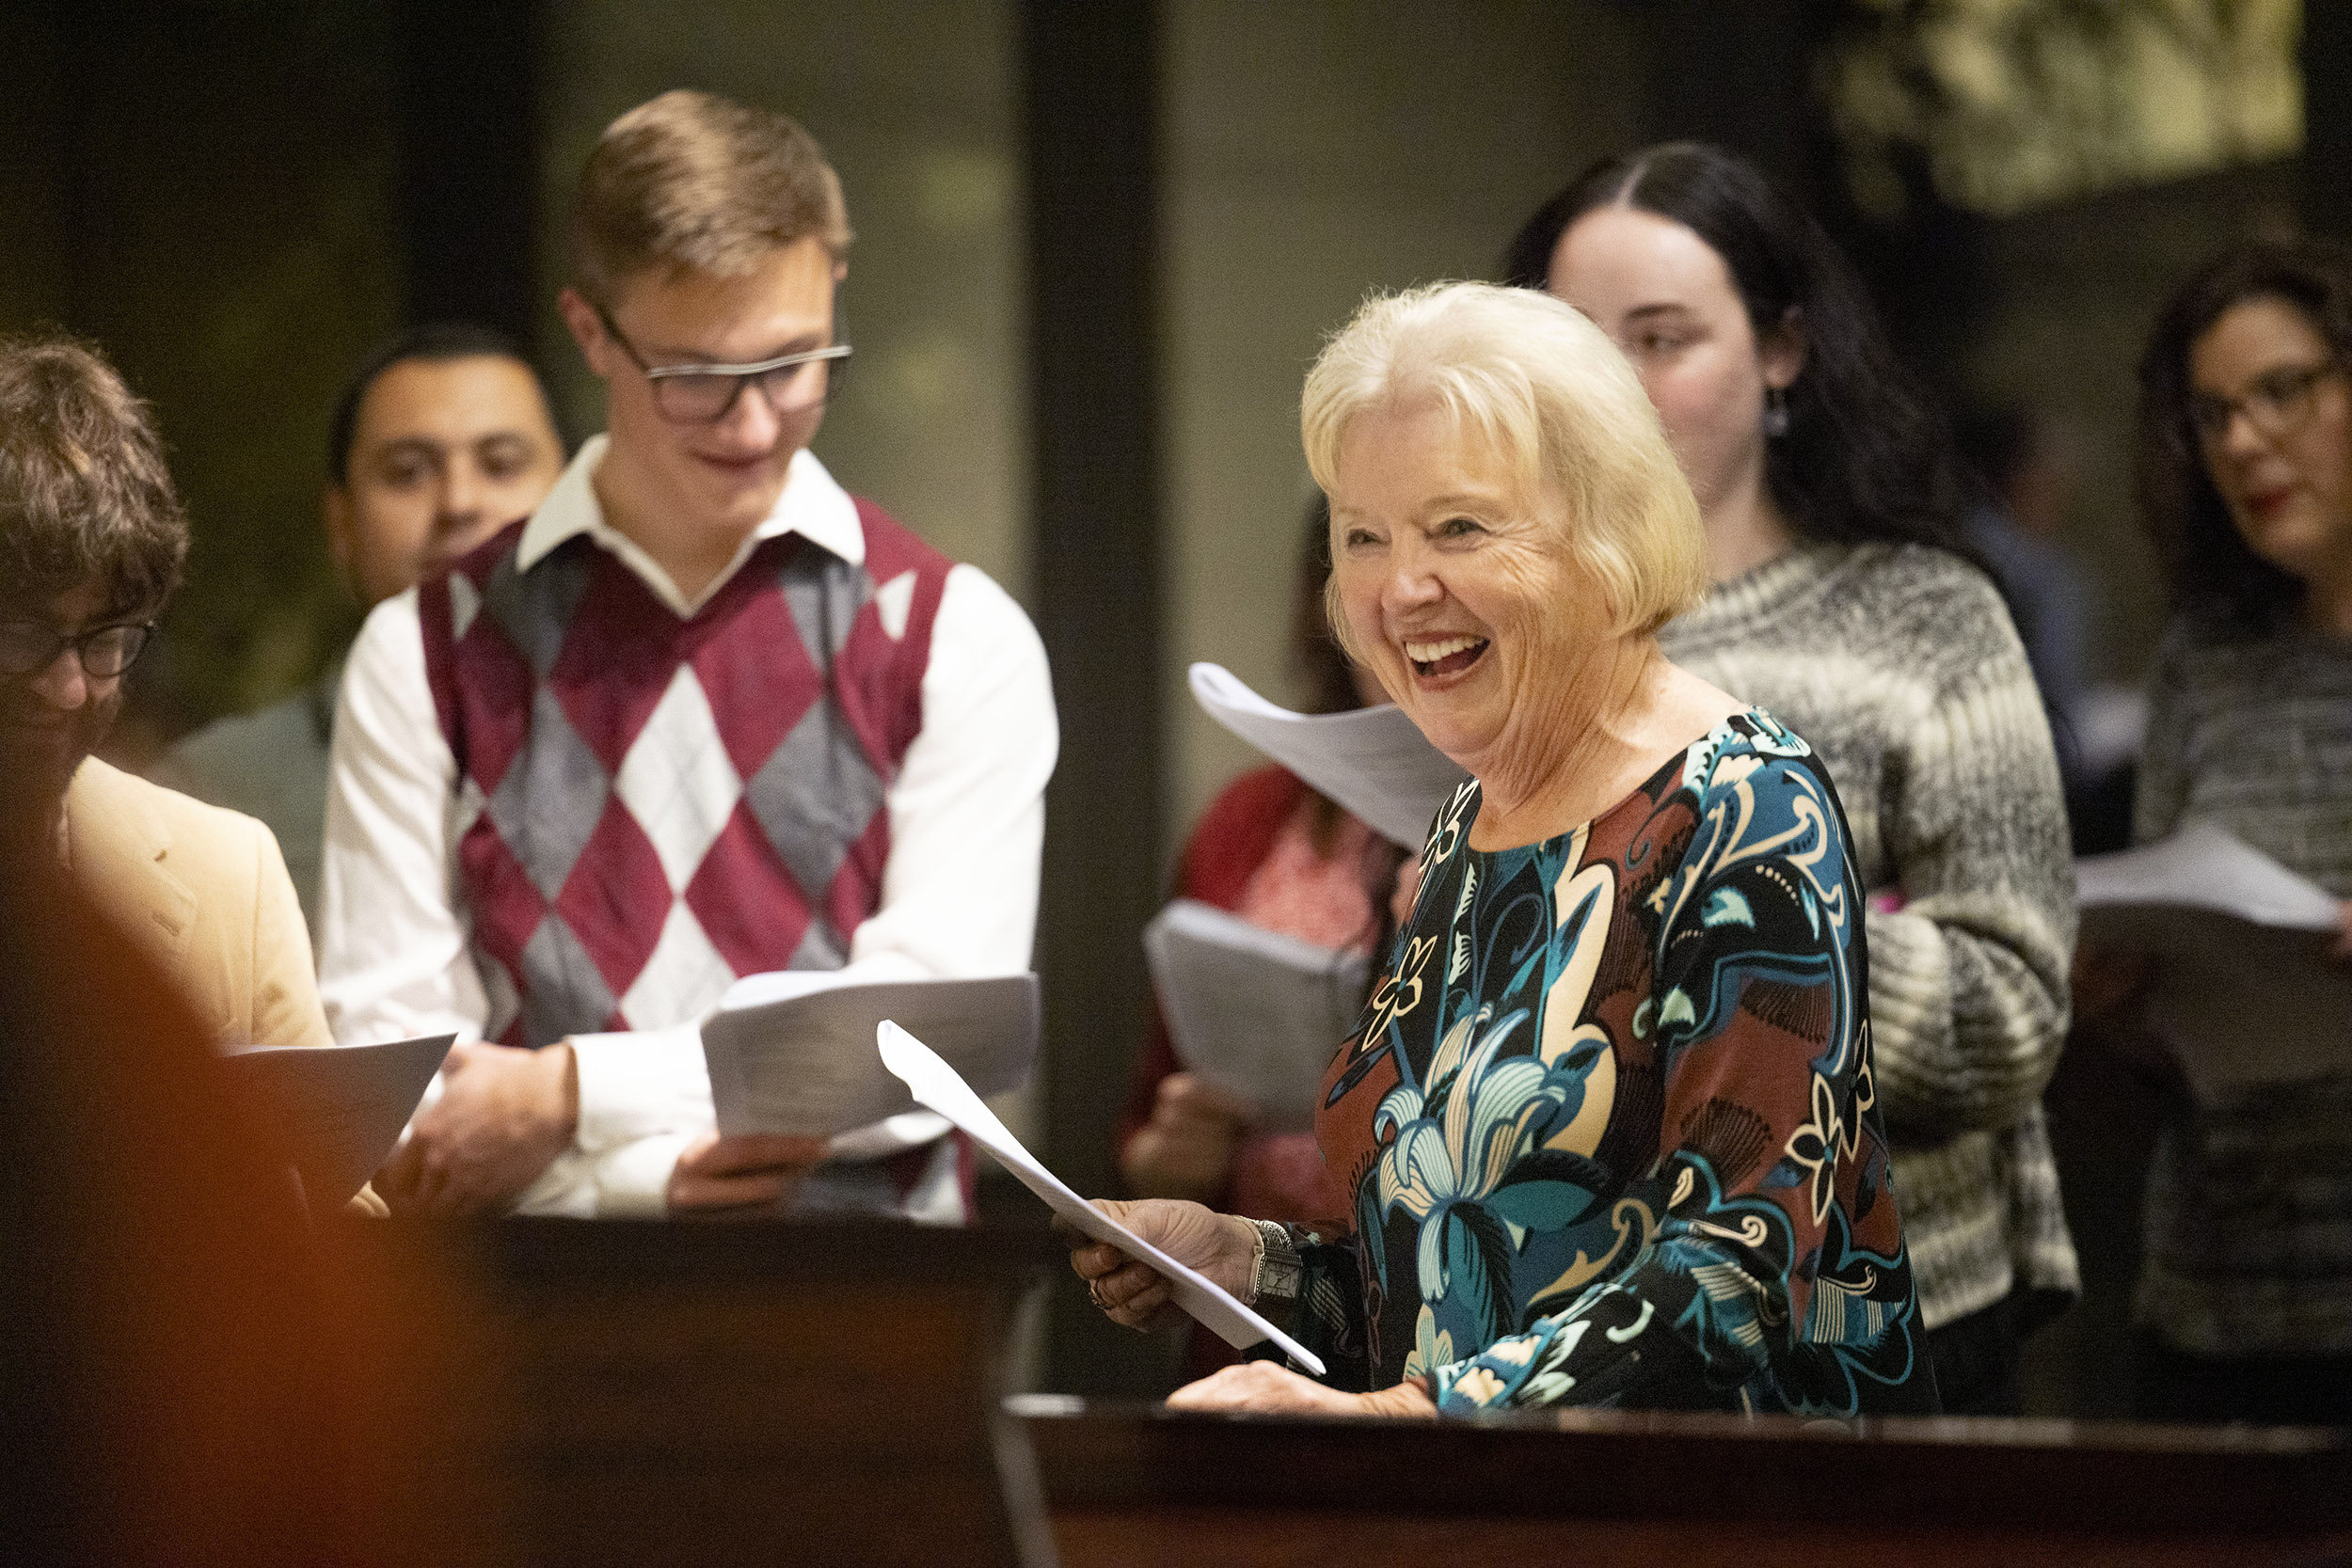 Ath revives Singing Party to honor Professor Ward Elliott.